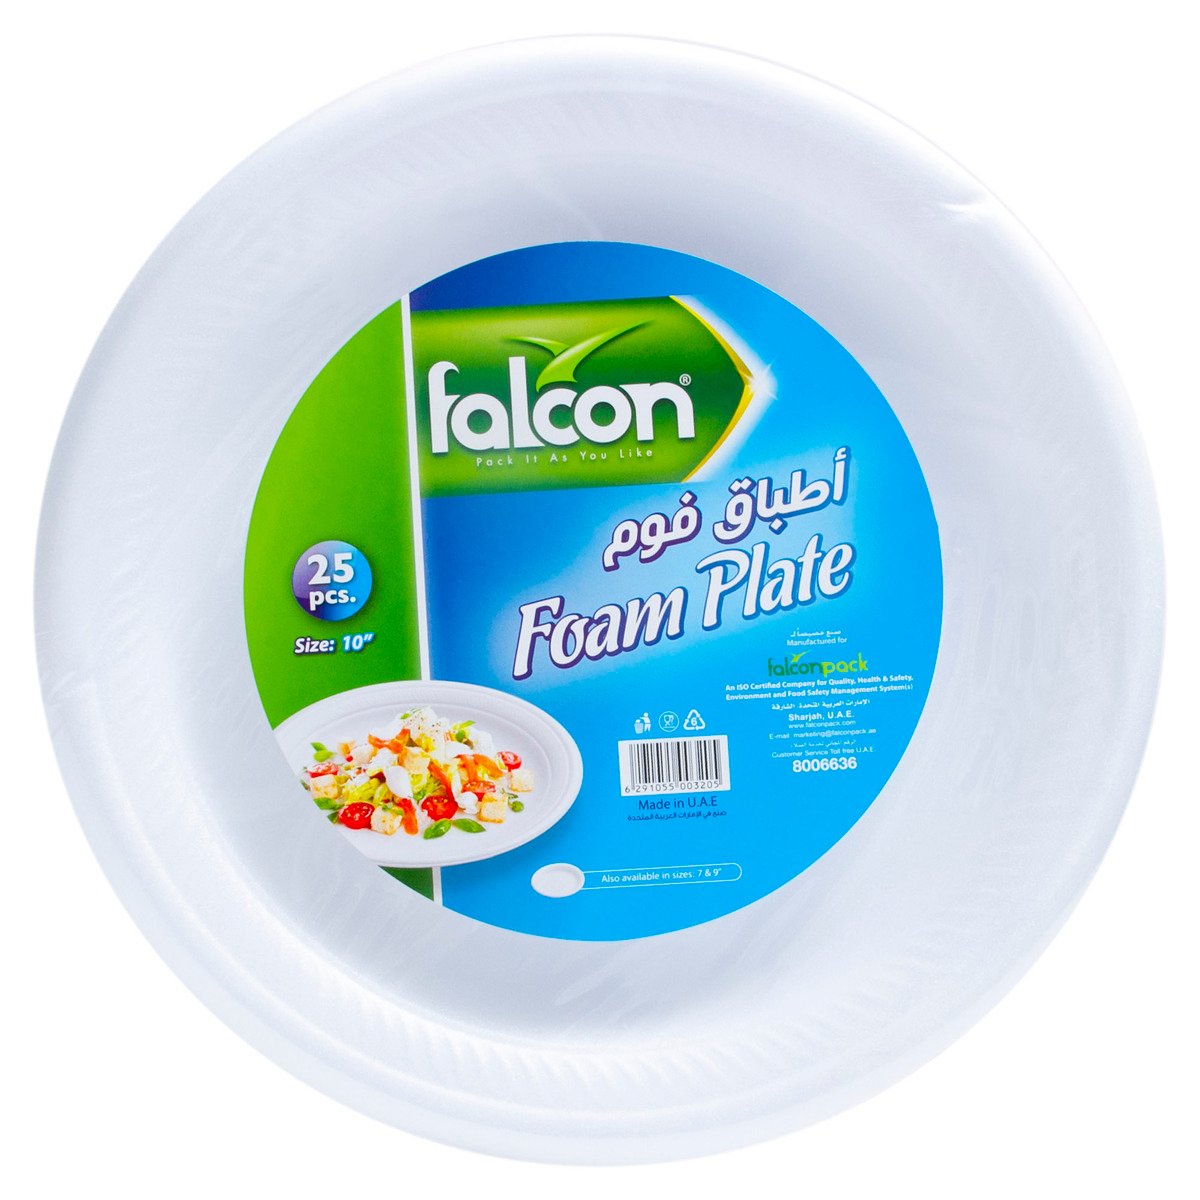 RETAIL-MFMRT013 Foam Plate 10 Inch (1 Pack x 25 Pieces) – Falcon Pack Online